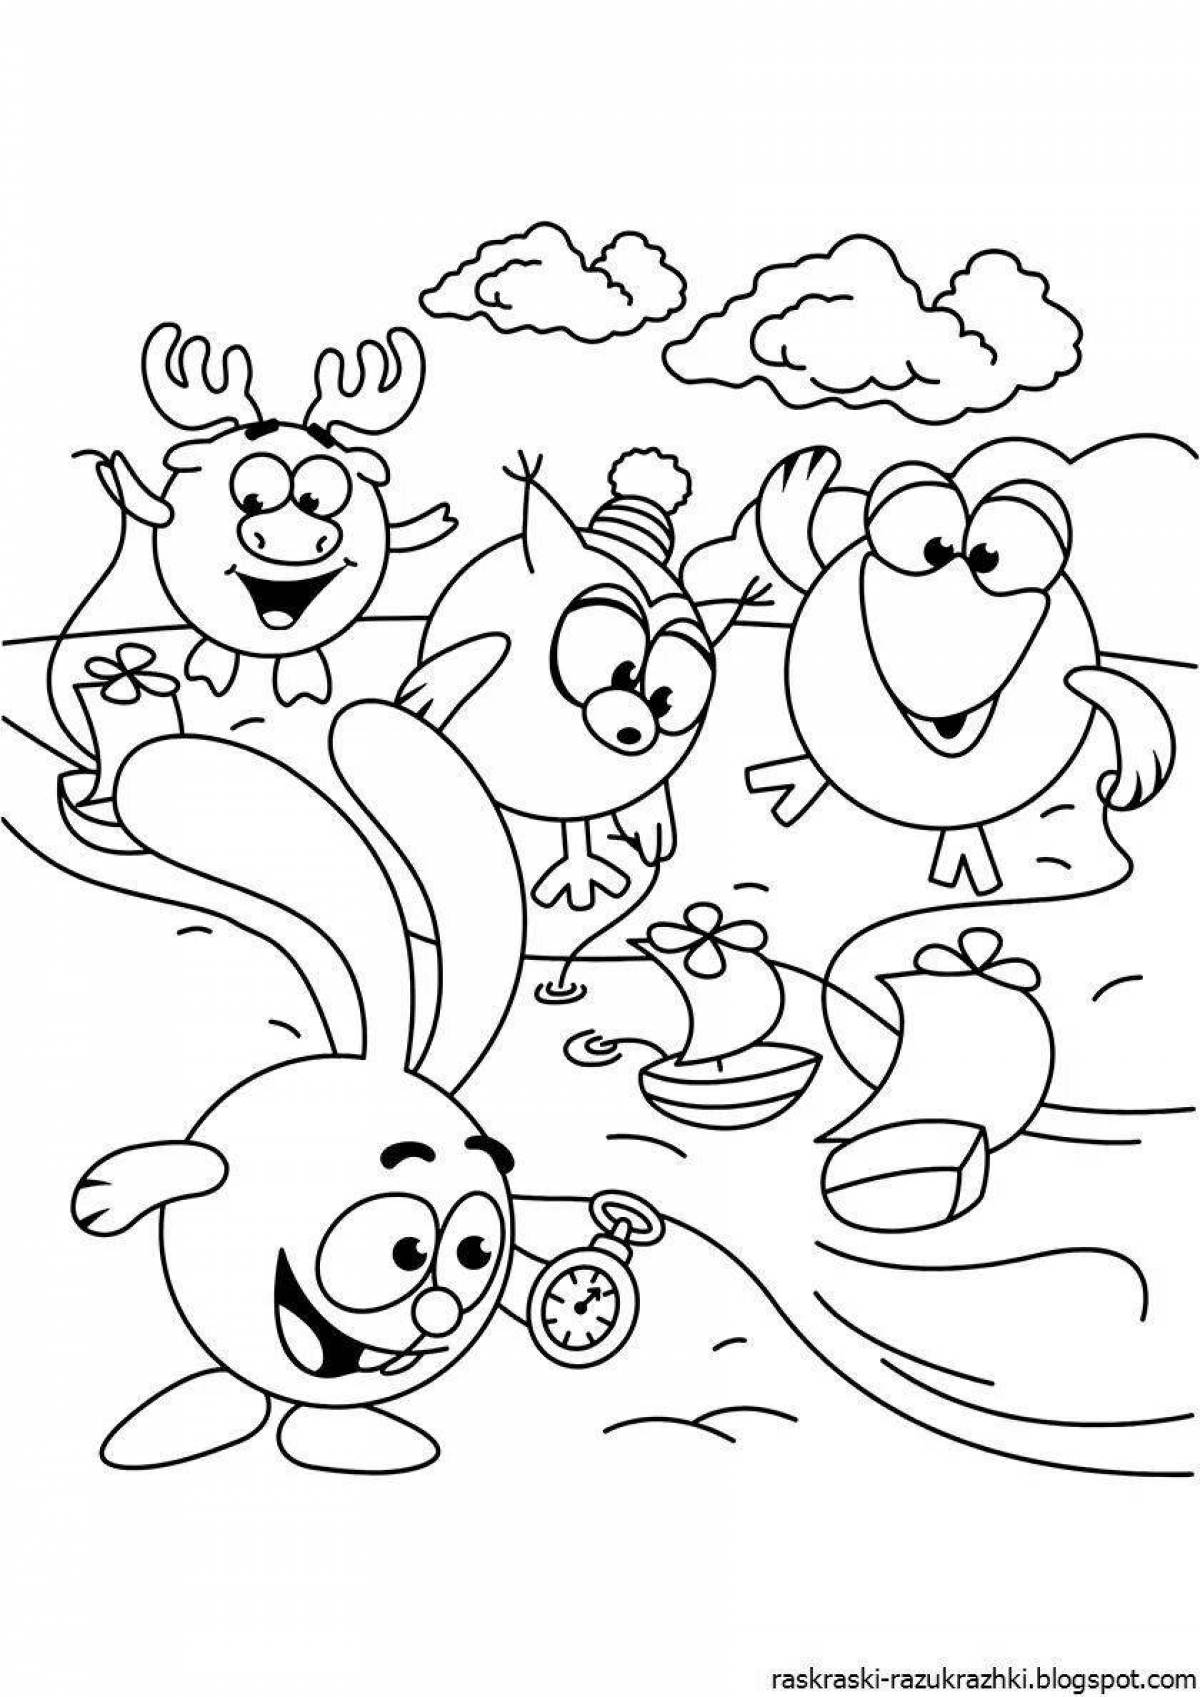 Charming children's smeshariki coloring pages